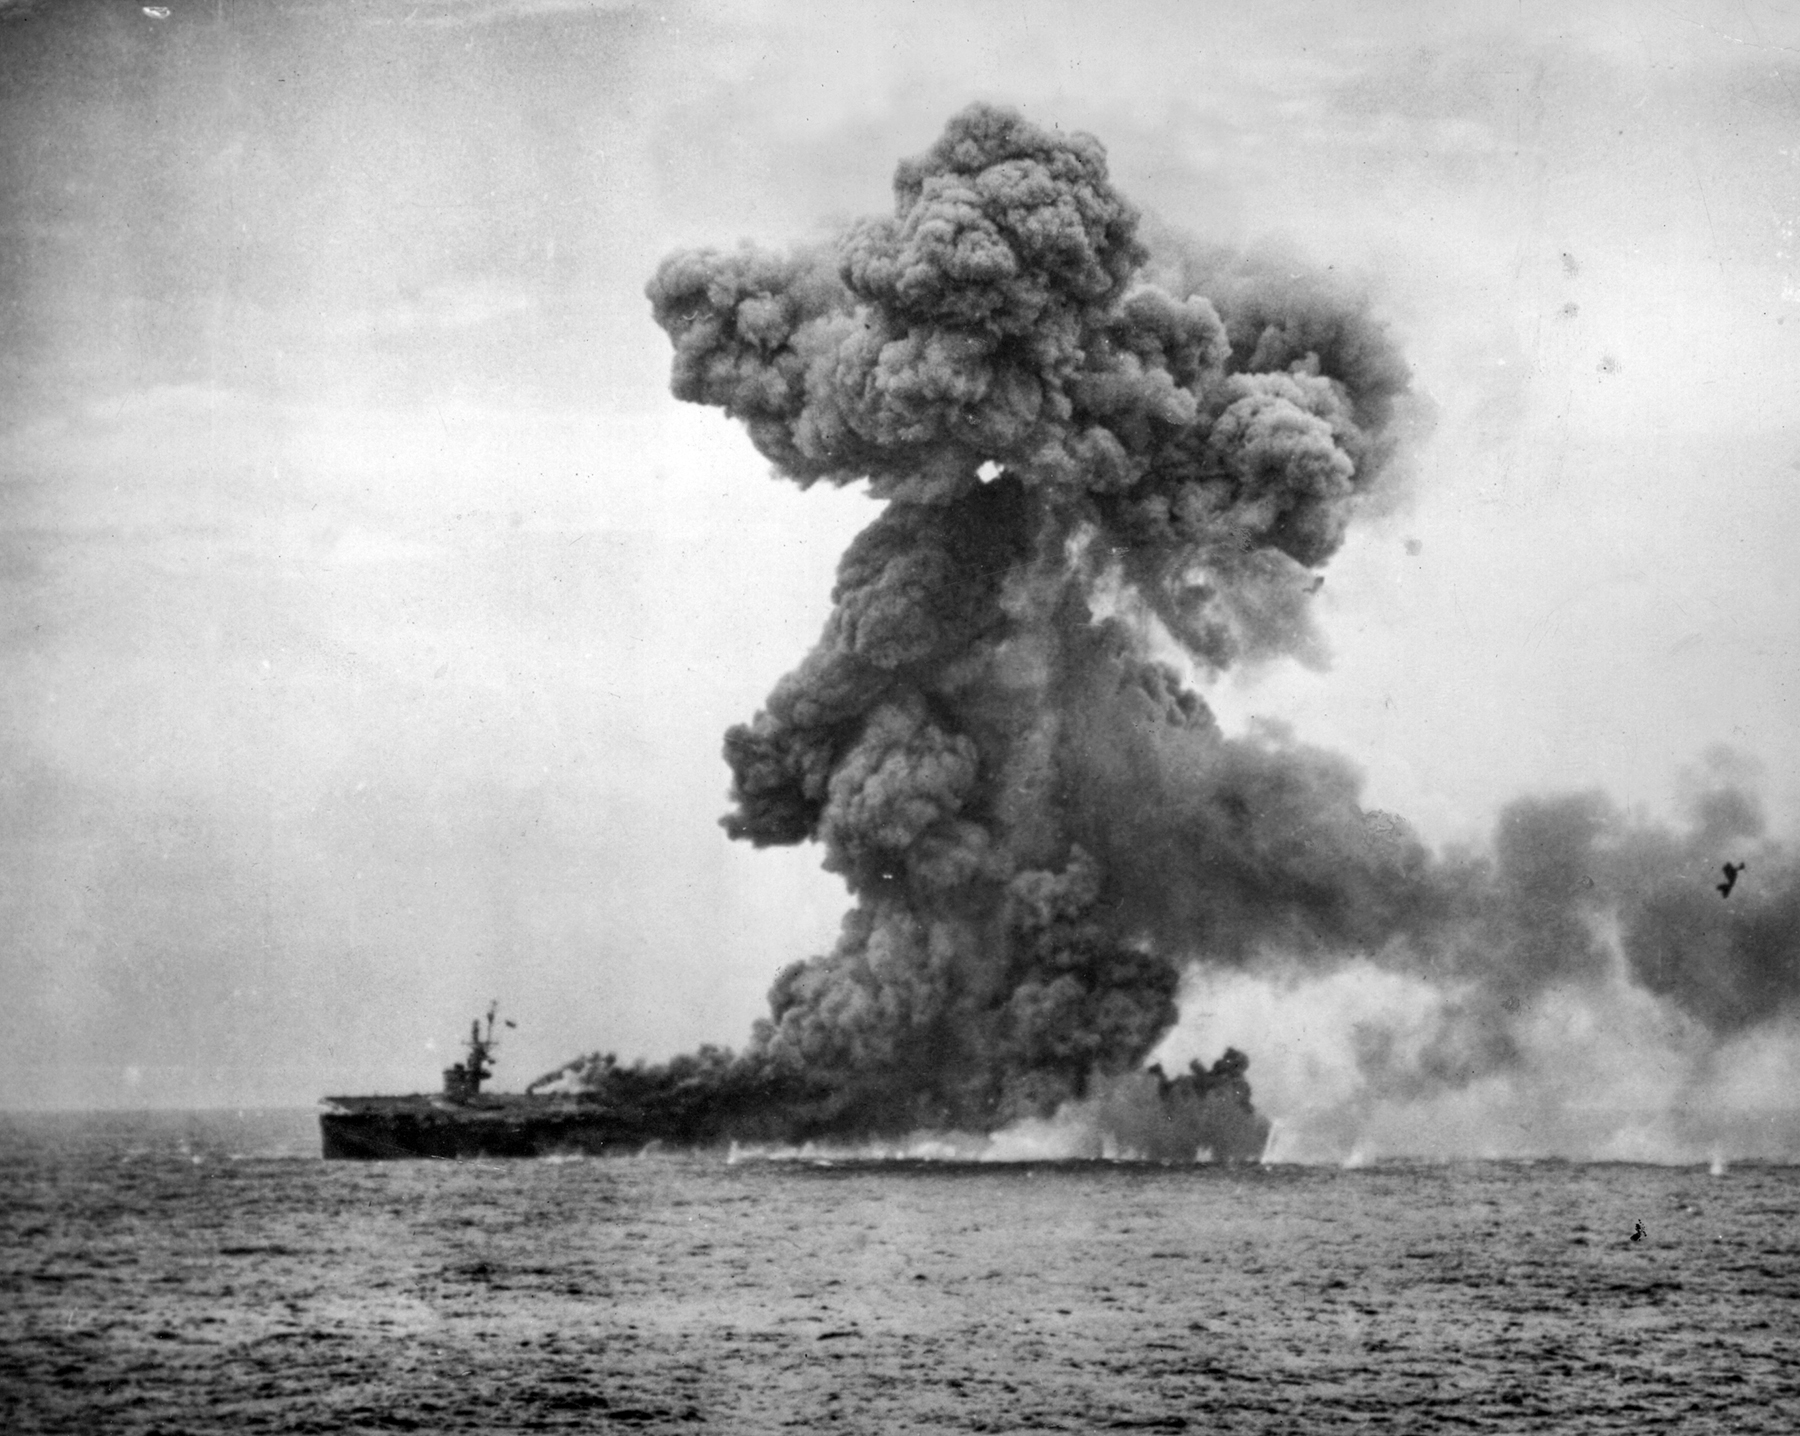 Multiple explosions rip apart the USS St. Lo, minutes after being hit by a kamikaze